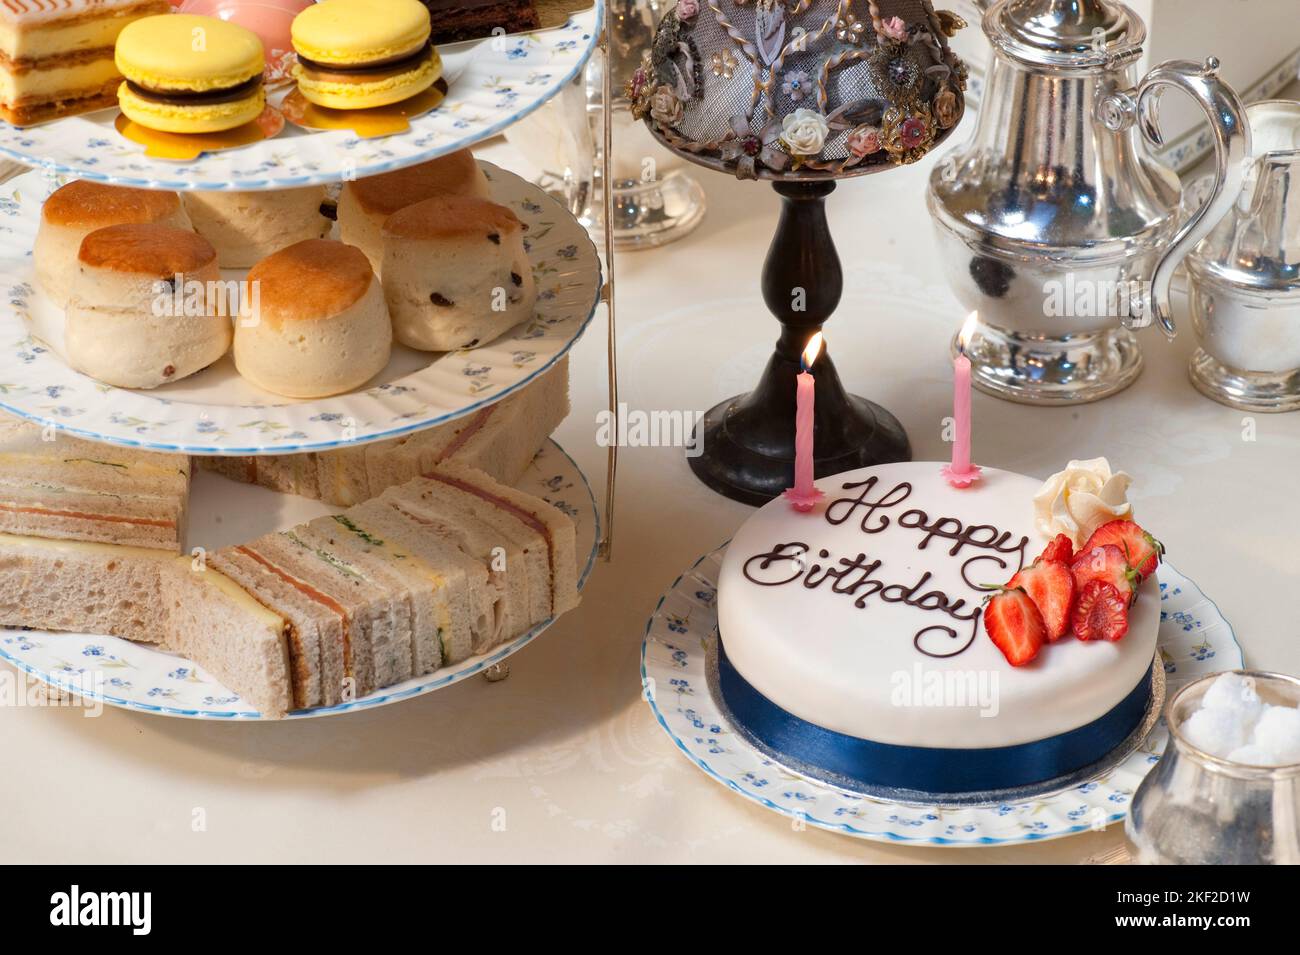 Birthday cake with fresh strawberry served during afternoon tea Stock Photo